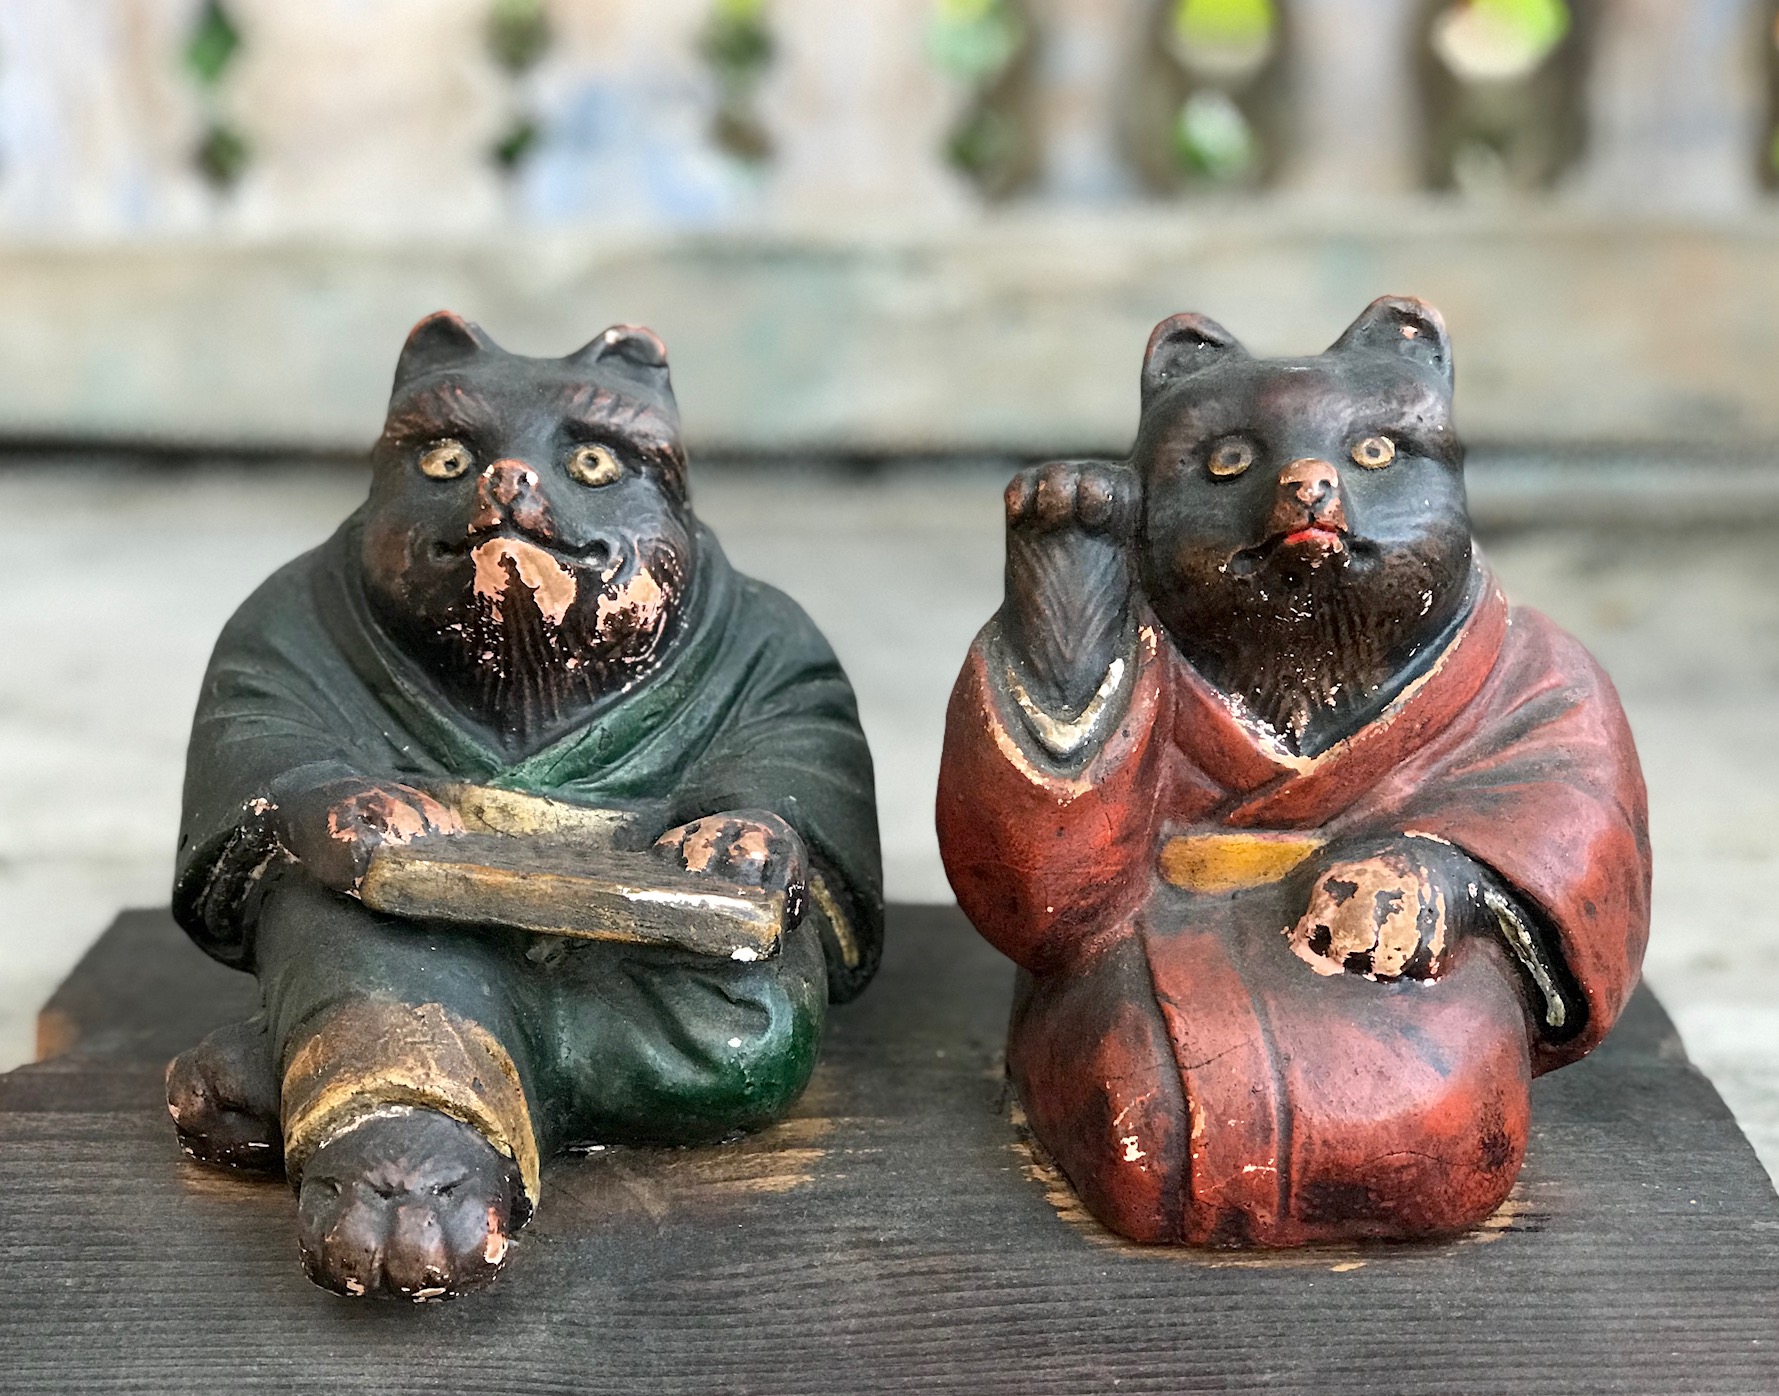 2 Wooden Tanuki in kimonos with abacus, and calling for good luck, Tanuki have a very complex and interesting folkloric history. While largely unheard of in the states, Tanuki have been among the most significant characters in Japan since ancient times. Contemporary Tanuki are primarily a welcoming symbol of prosperity. In the mid 20th century the character was adapted, both visually and symbolically, to suit modern culture and, although they retain much of their prankster persona from the original 16th century creatures, they are much more benign. They have a long list of supernatural powers, most notable shape-shifting. Ancient Tanuki, humorously portrayed in block prints are now mostly found in museums and private collections. Tanuki statues are often found in restaurant or shop windows and outside temples. Famous for getting drunk and not paying their bills, they are usually portrayed wearing a straw hat and carrying a flask of sake and a ledger of promissory notes. Thus they can also serve as cautionary figures against the hazards of overindulging in alcohol. They always have big bellies and humorously large testicles which they use as drums. 5" x 10 1/4" x 7 1/2", sold., thedavidalancollection.com , solana beach, ca